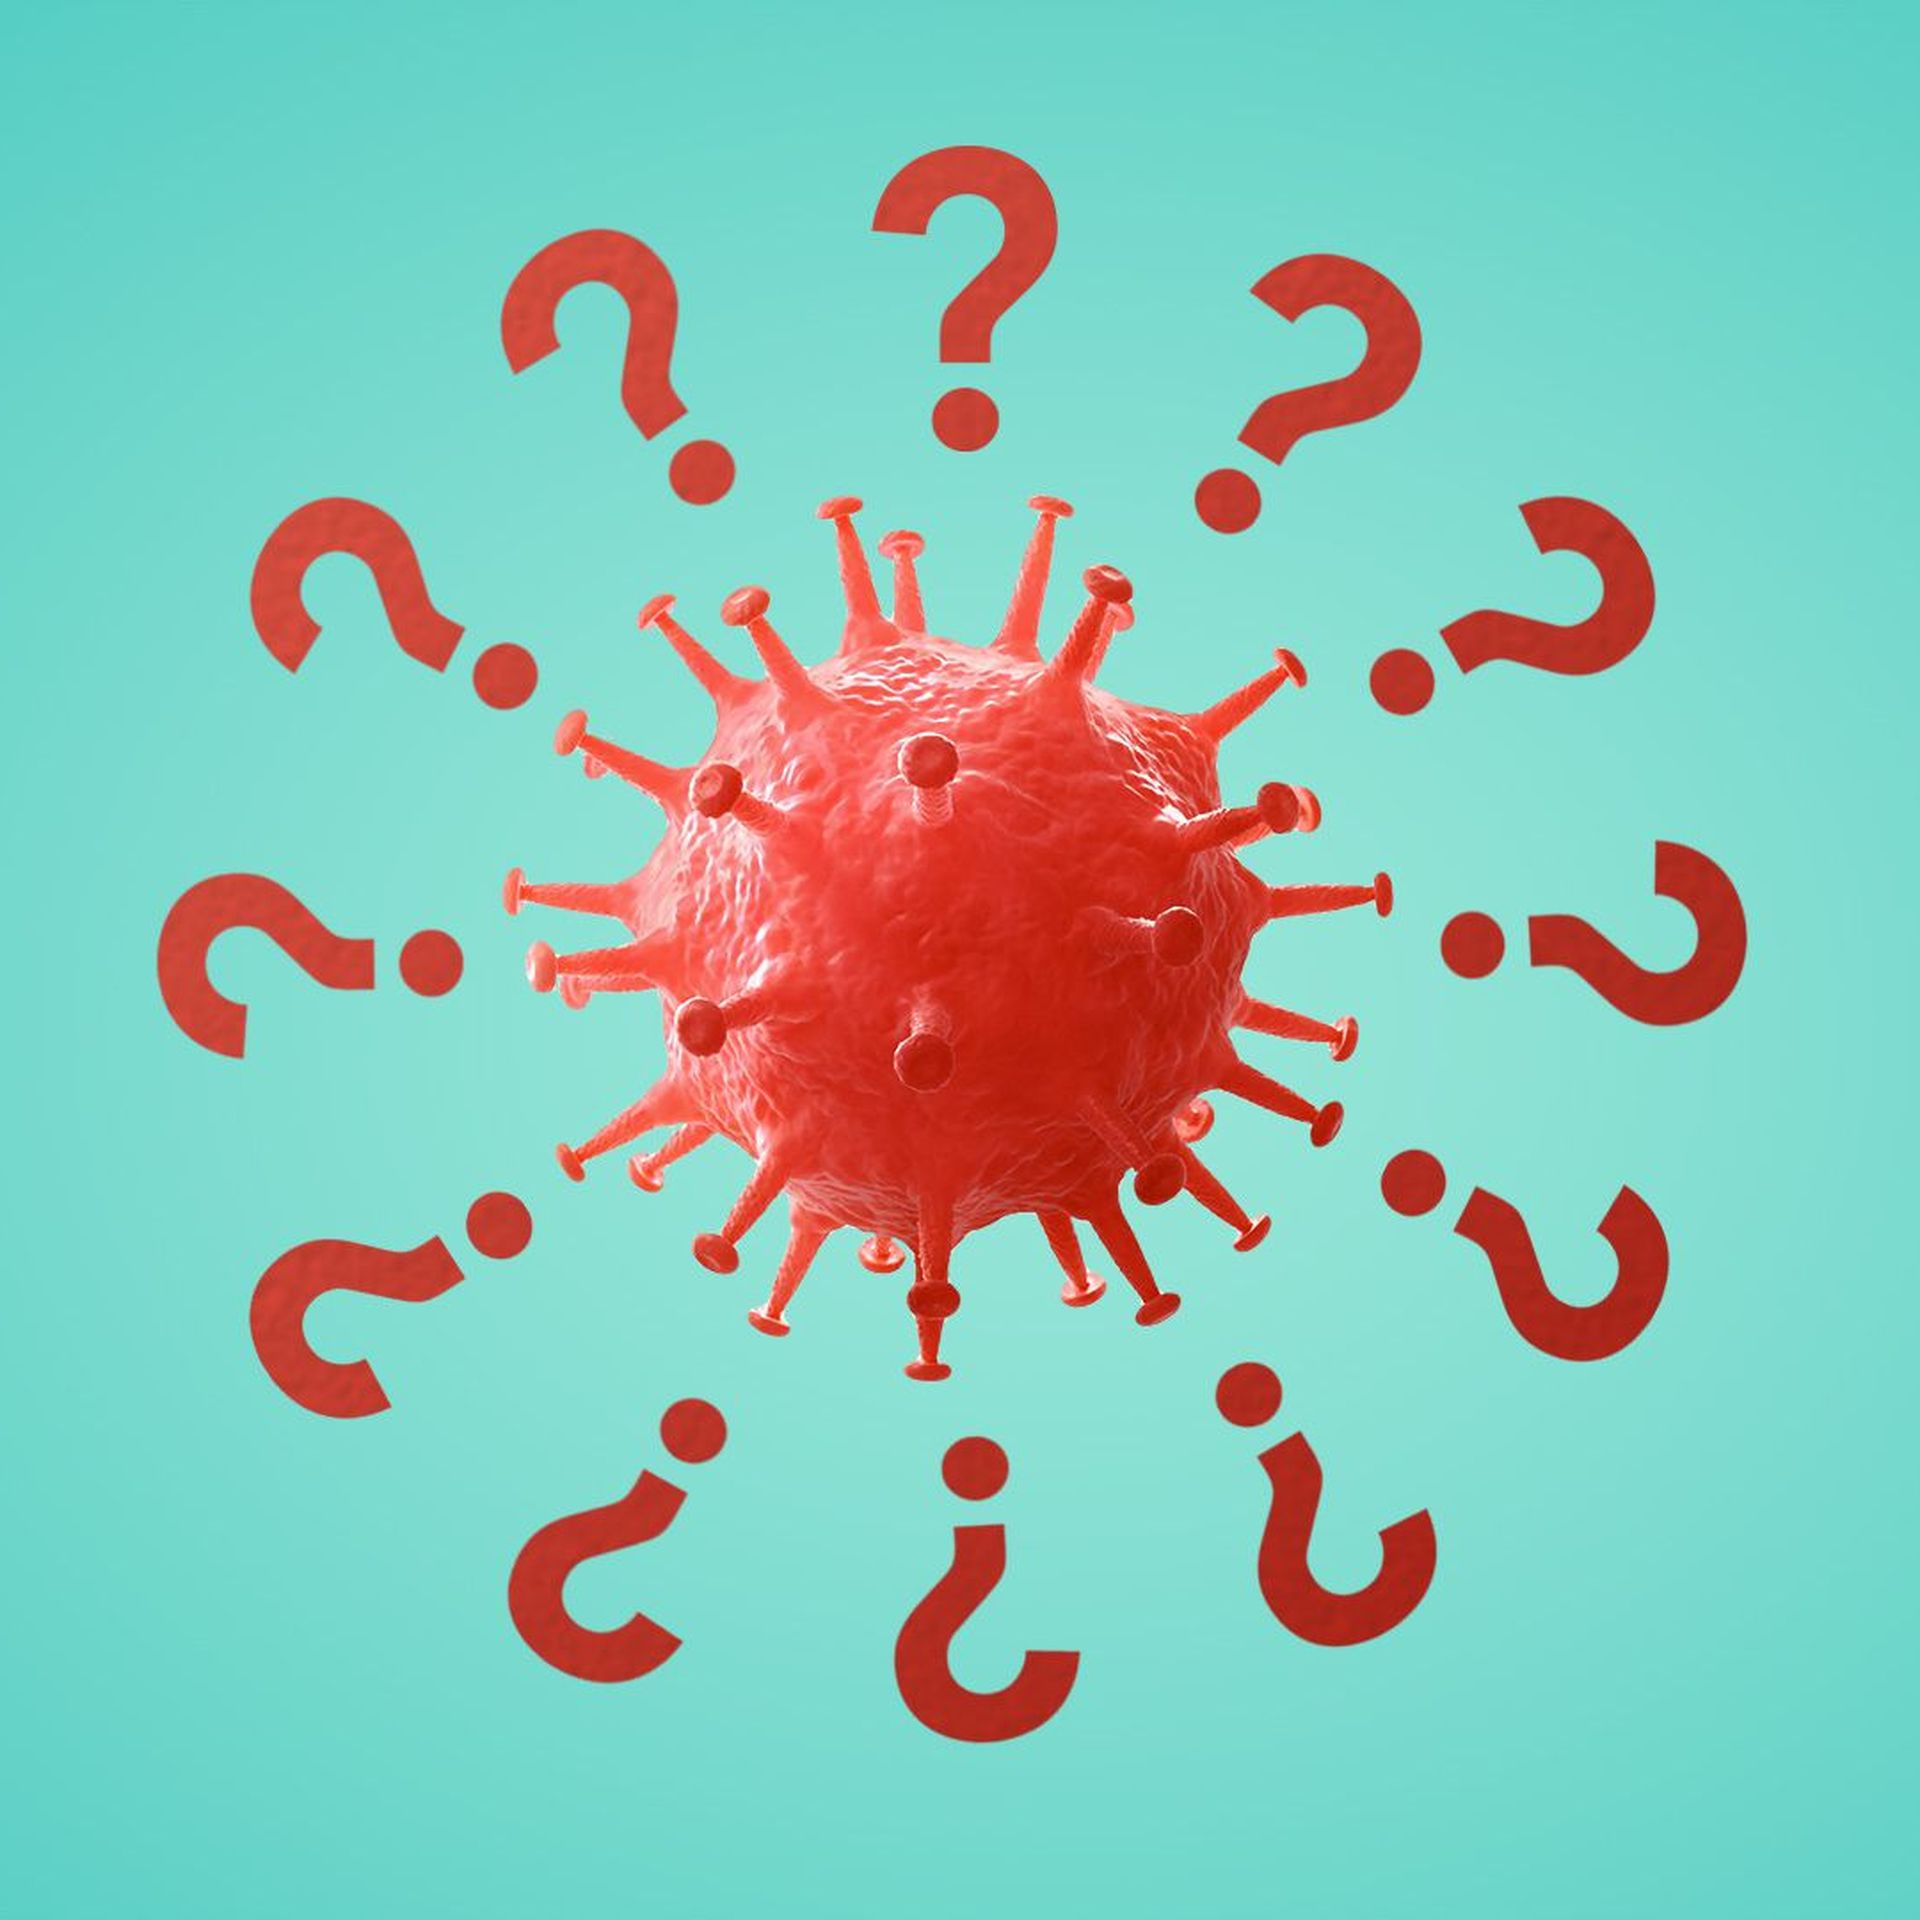 Illustration of a virus cell surrounded by question marks